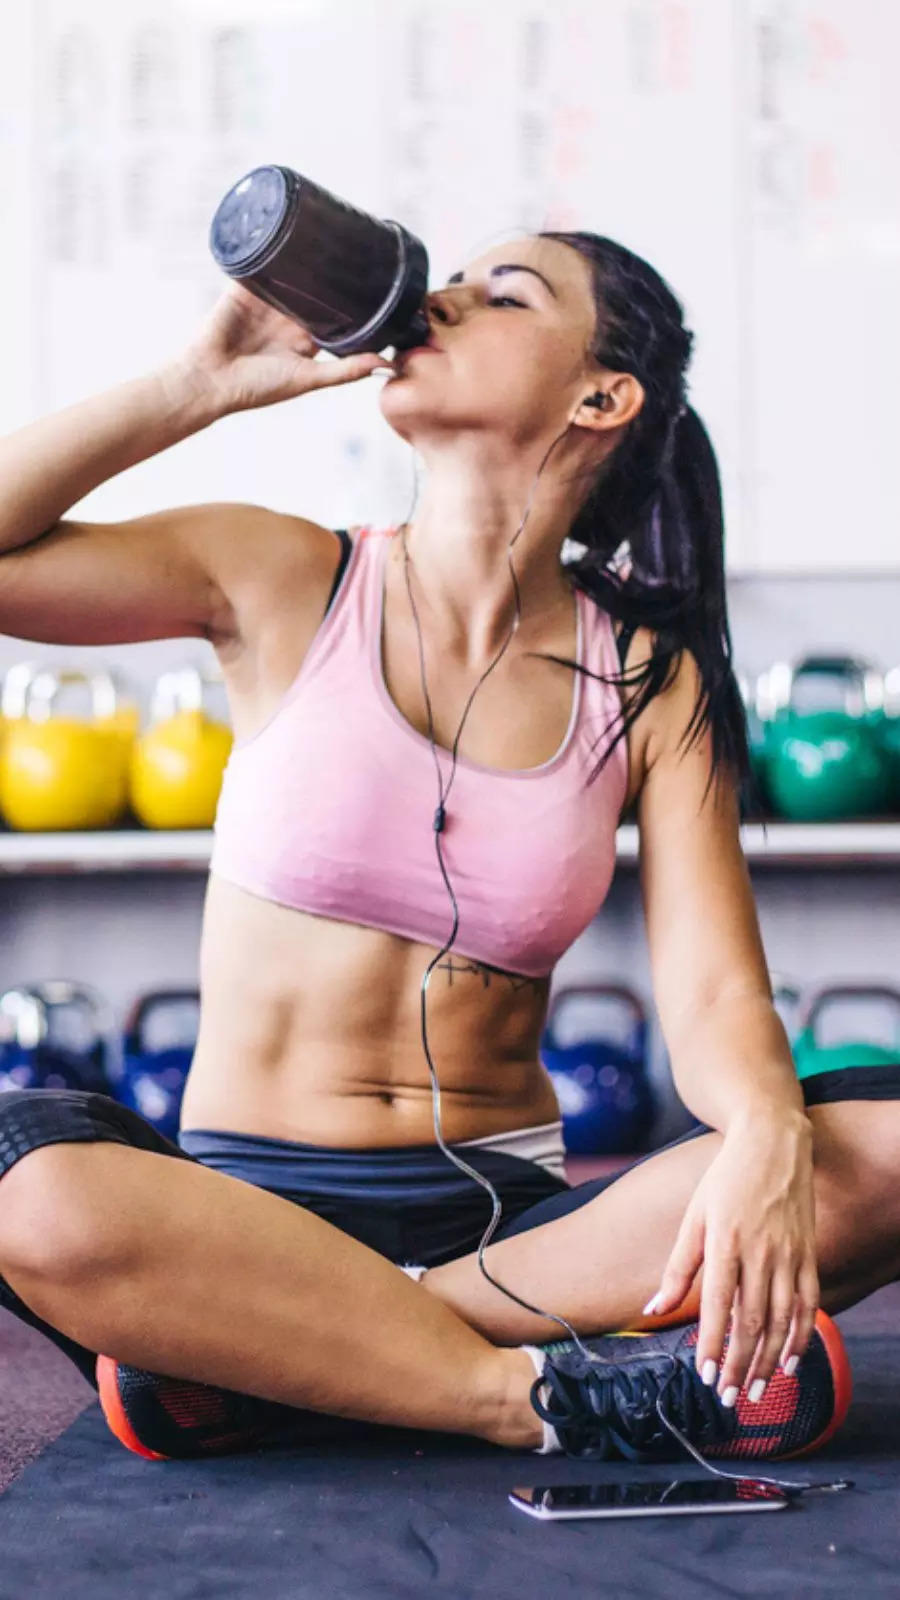 6 drinks to have after an intense workout 